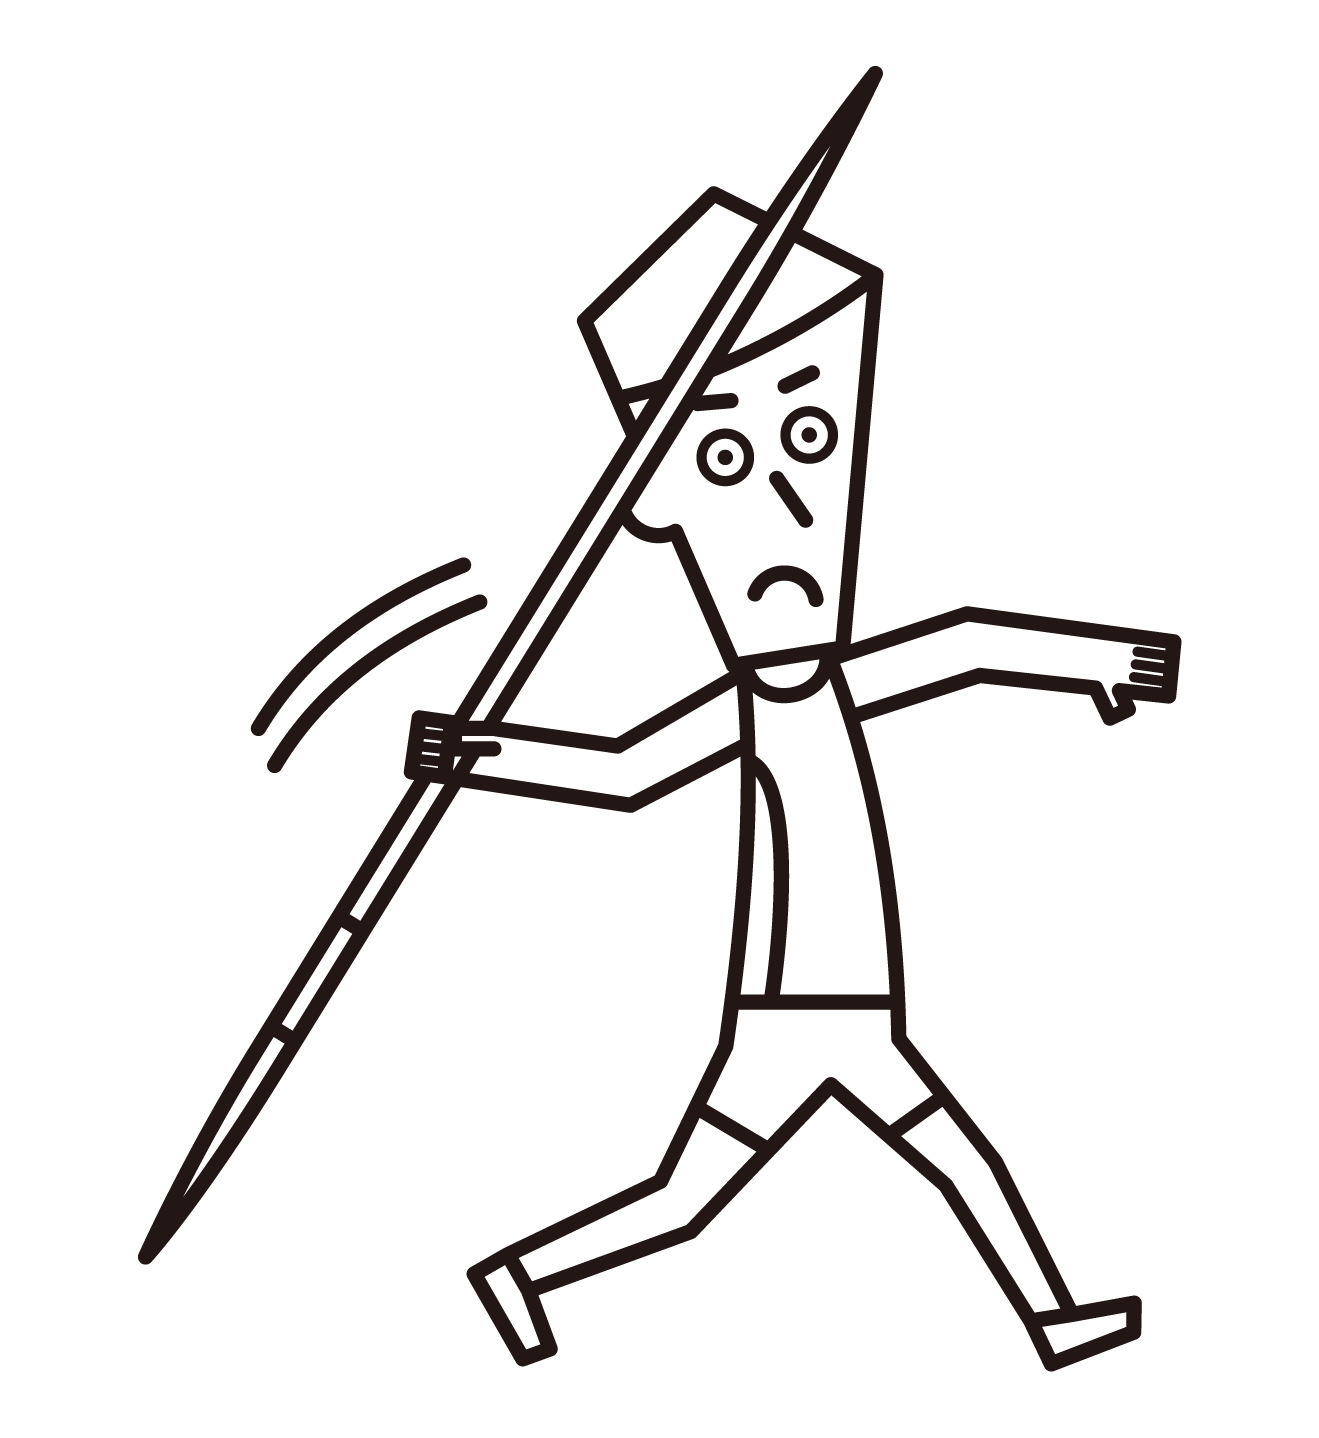 Illustration of a spear-throwing player (male)